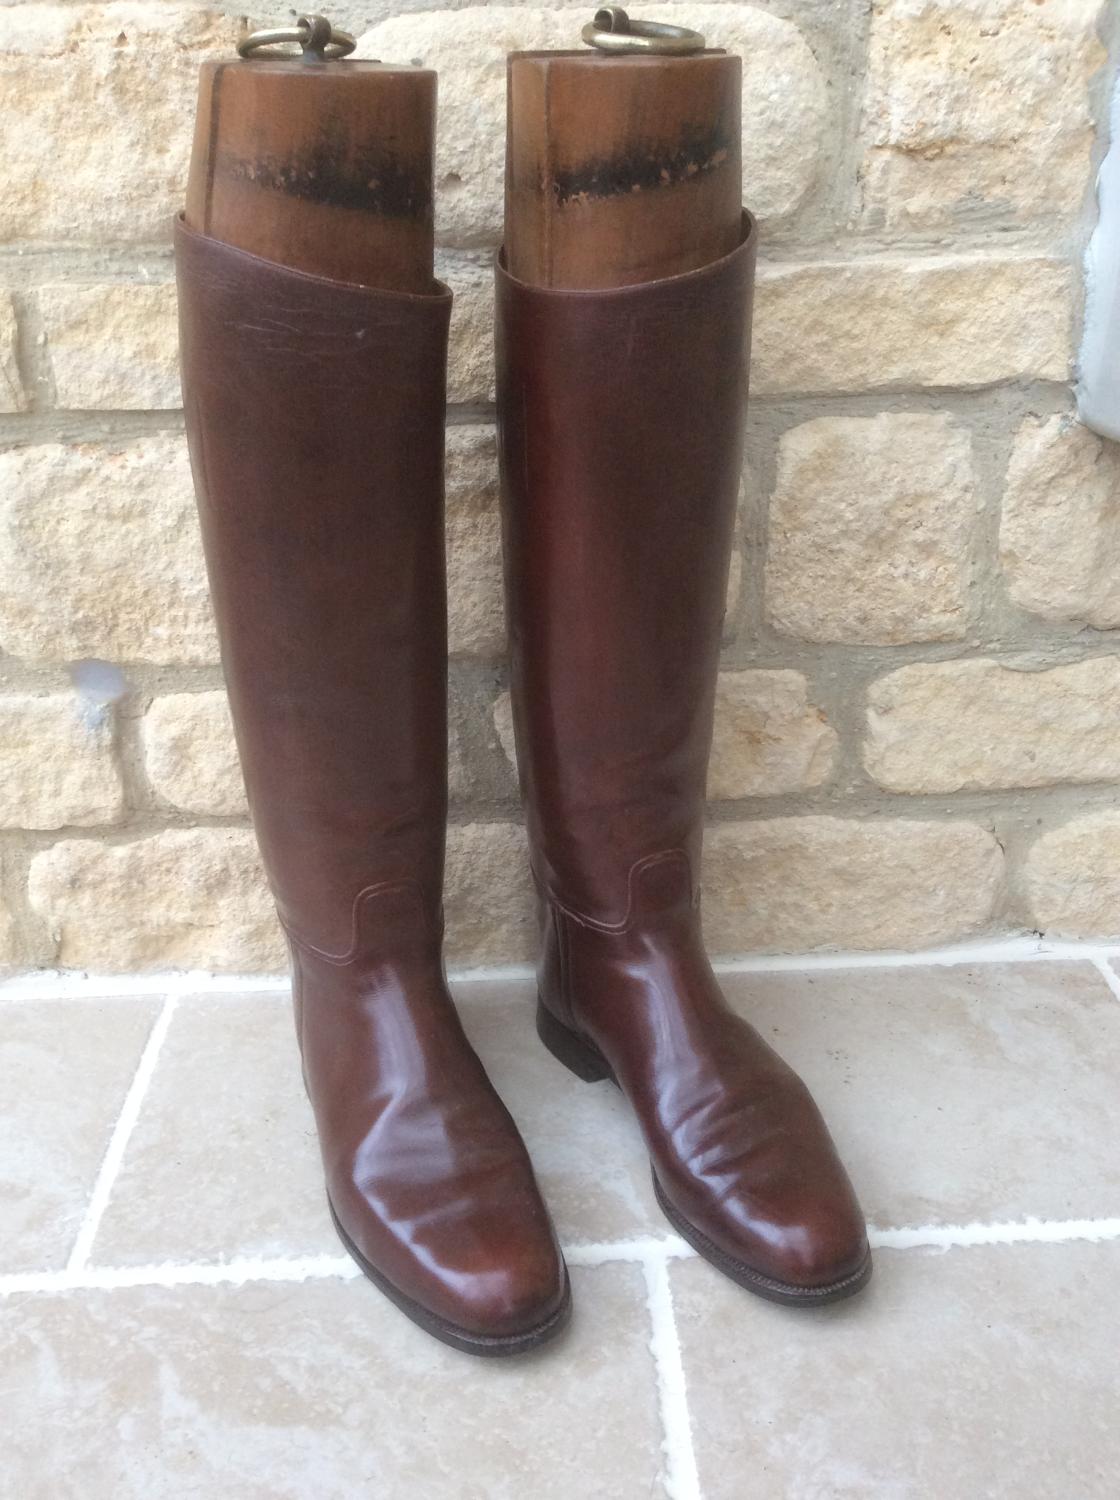 Vintage leather military/riding boots